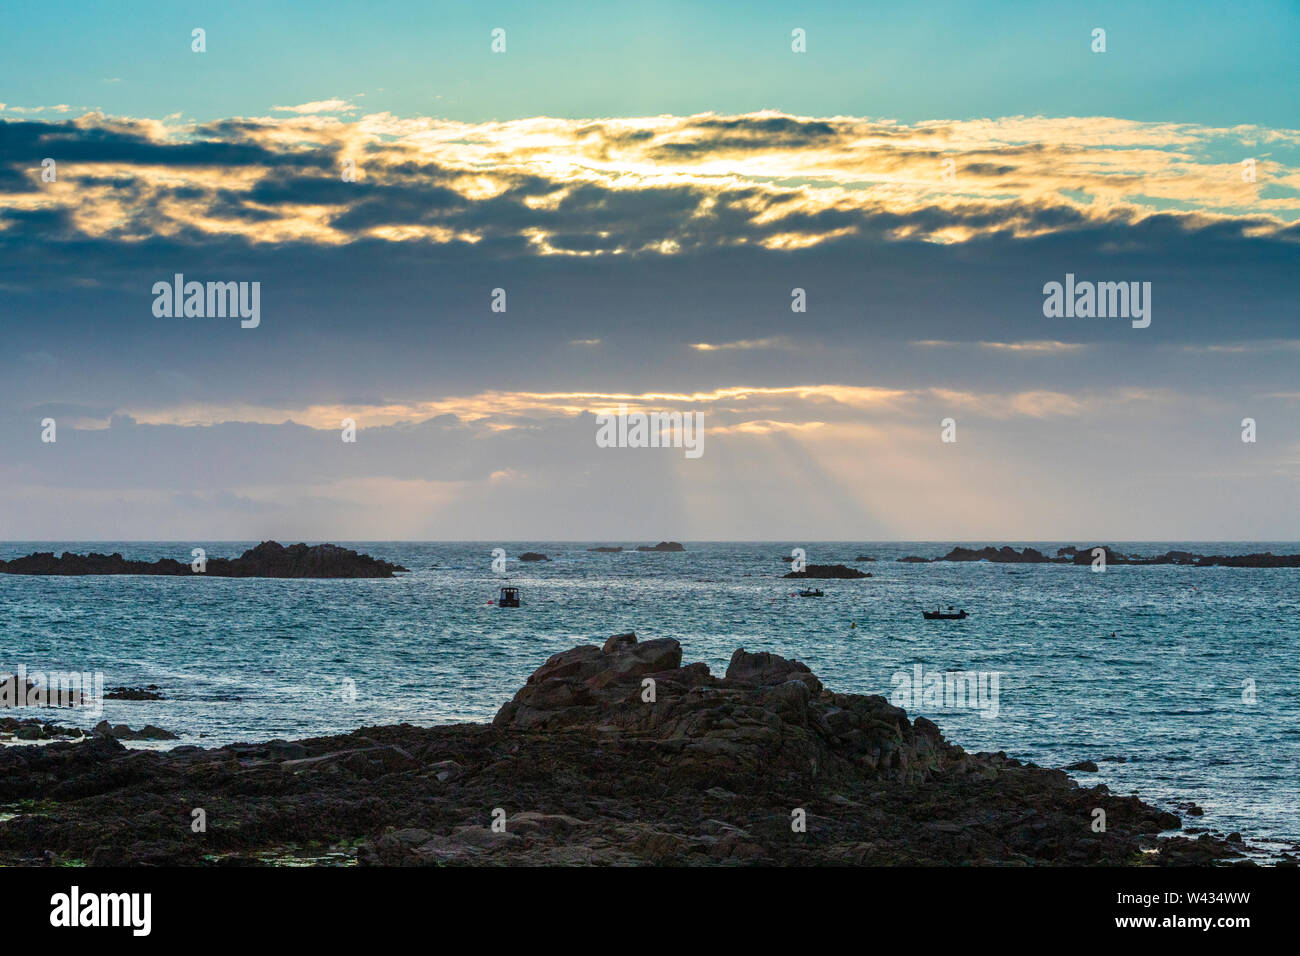 The sun setting over Cobo Bay, Guernsey, Channel Islands UK Stock Photo